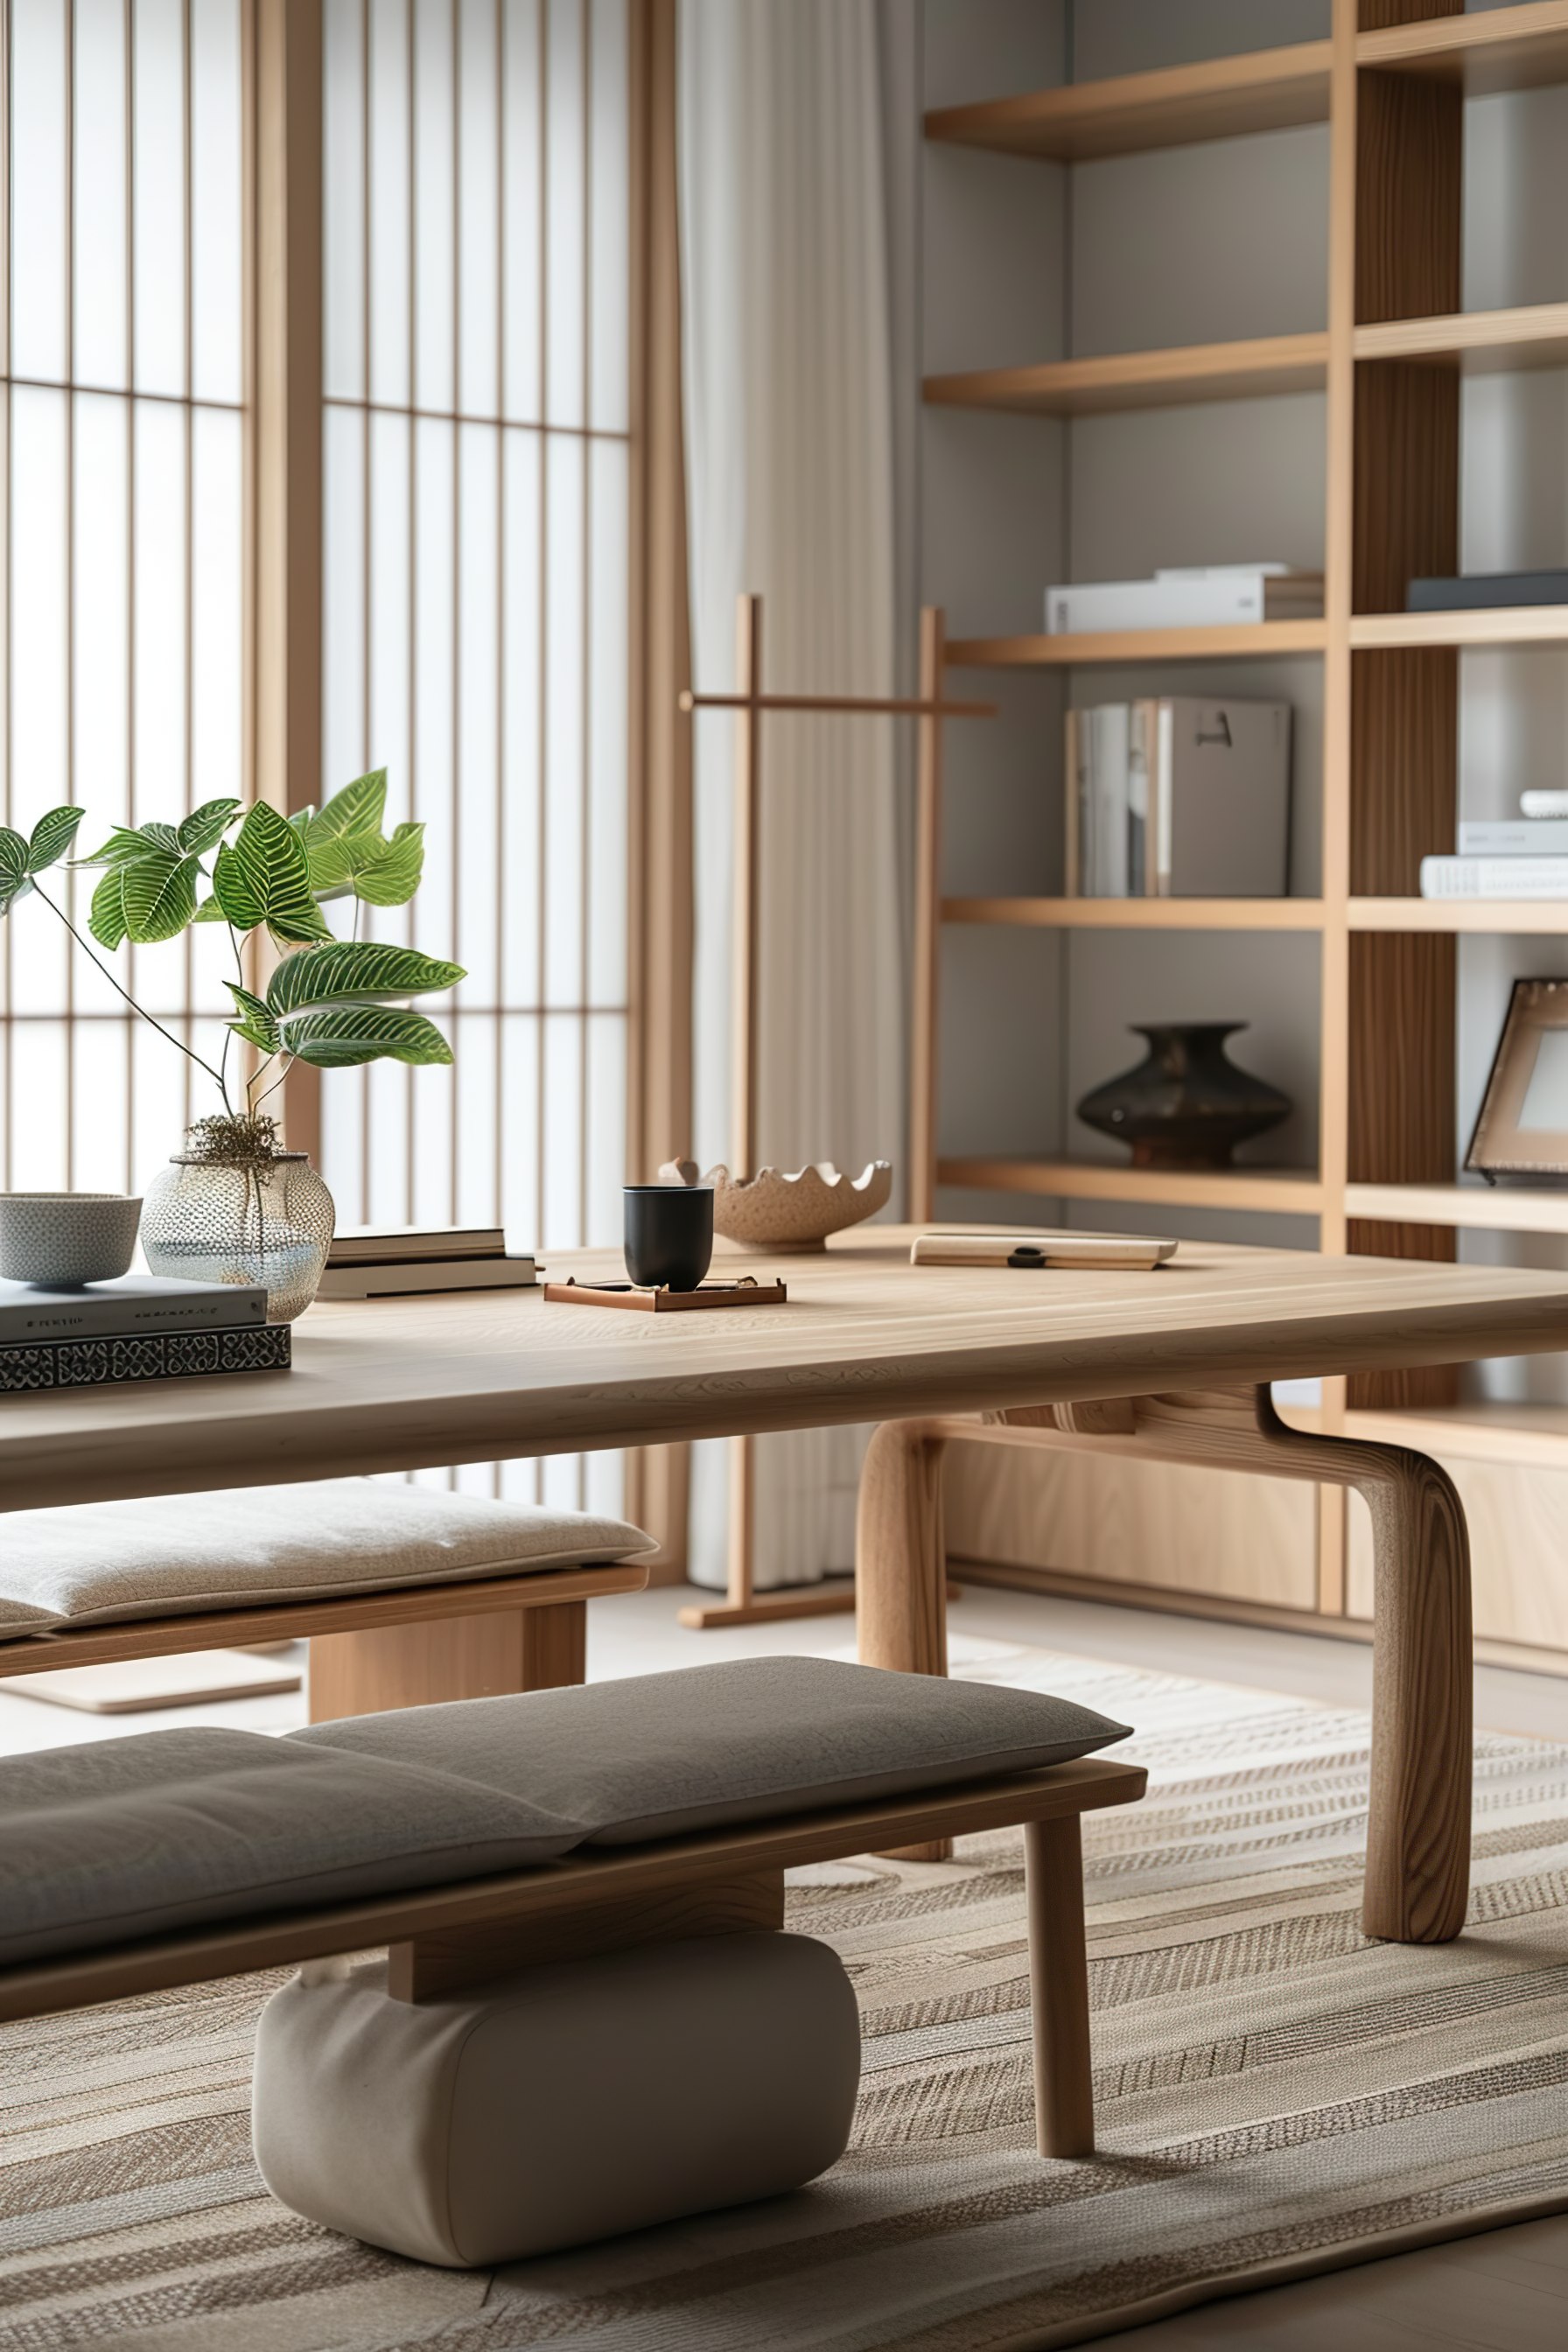 ALT: A serene Japanese-inspired living space with a wooden low table, floor cushions, and an elegant shelving unit, bathed in natural light.